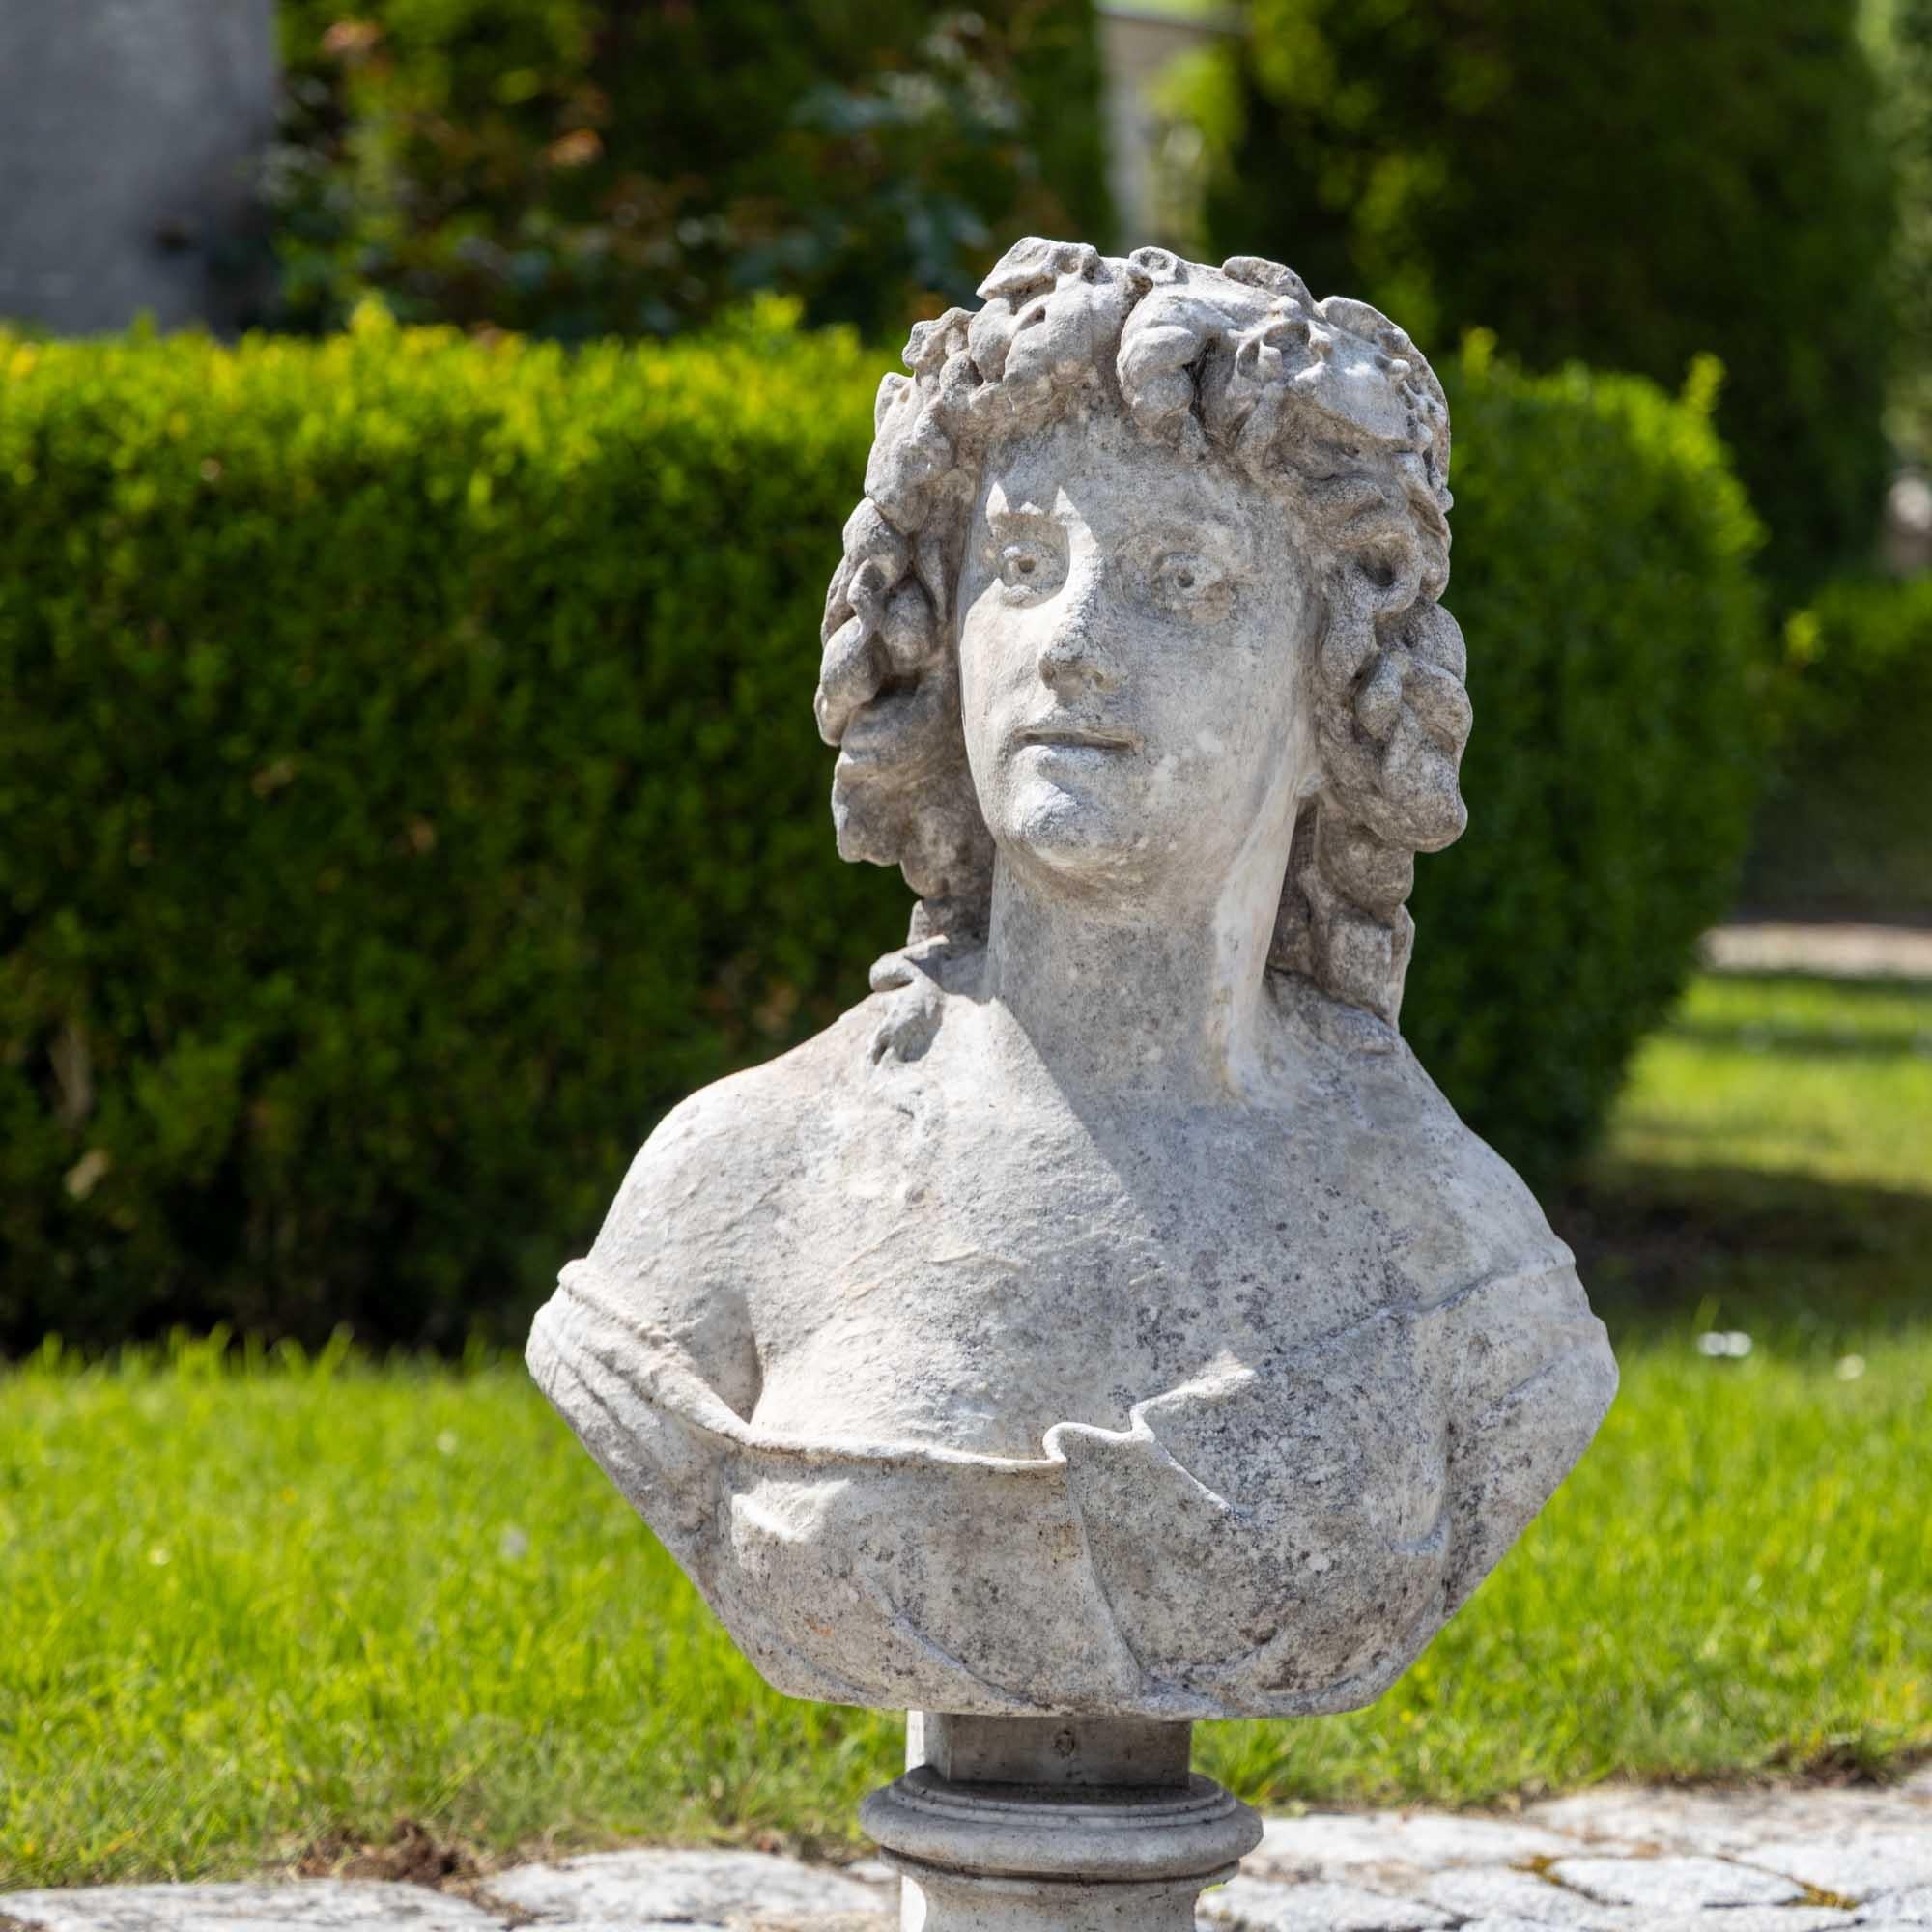 Hand carved marble bust of a woman with vine leaves in her curly hair and loosely falling clothes. The bust shows signs of weathering and has a slightly washed-out character.